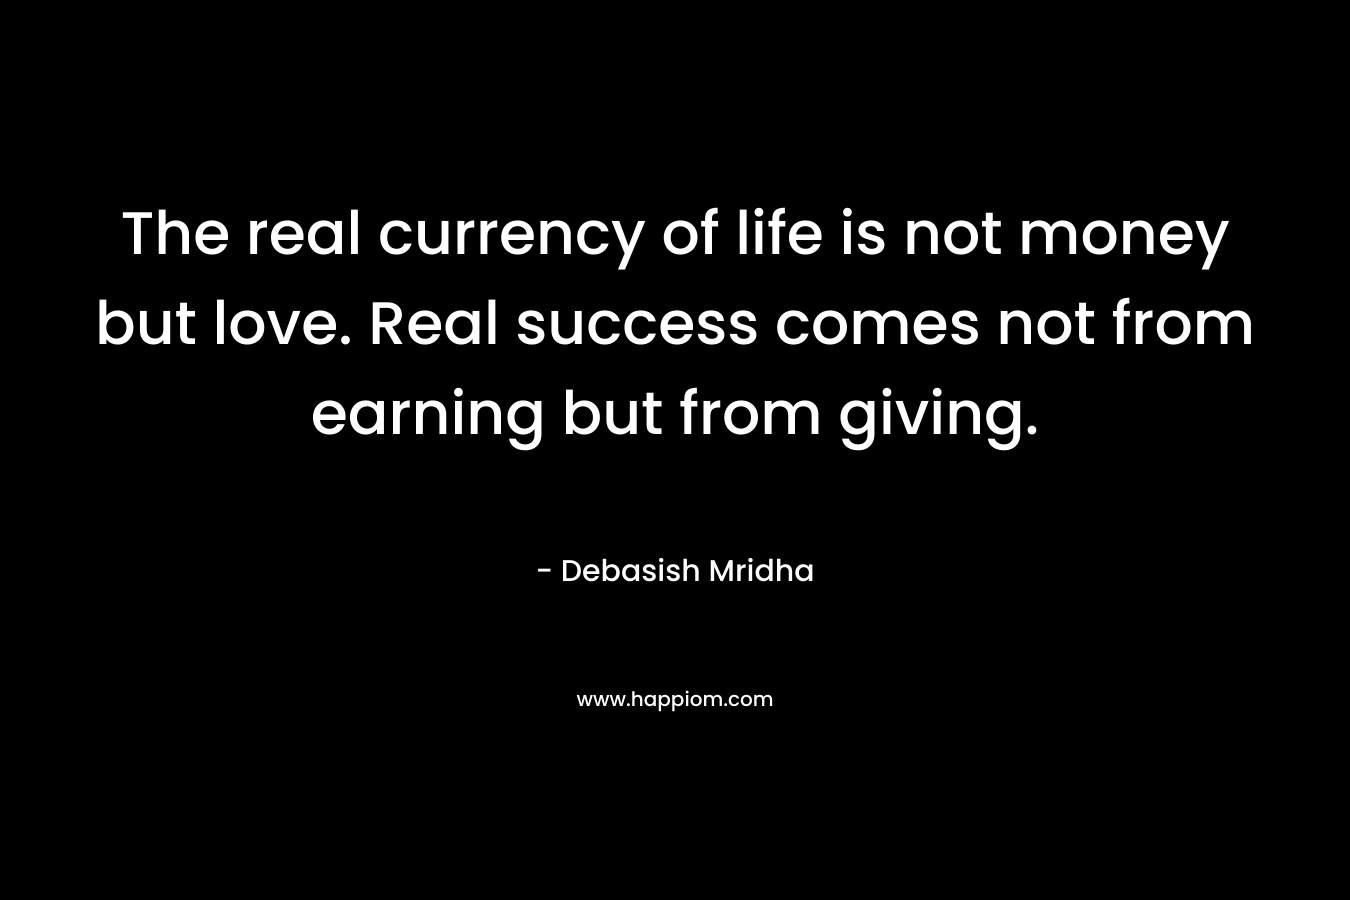 The real currency of life is not money but love. Real success comes not from earning but from giving.